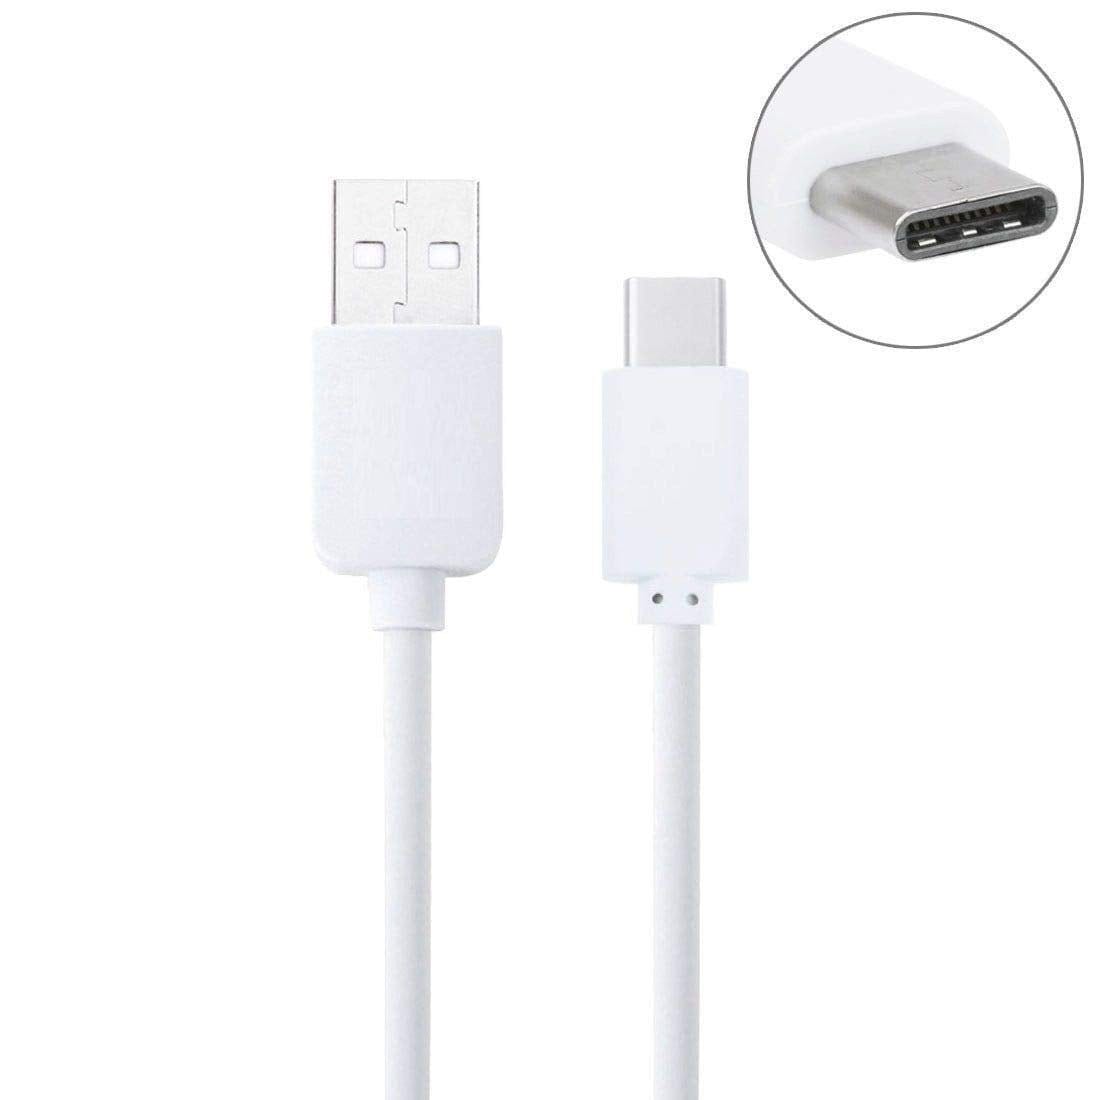 Samsung Galaxy Xcover 5 USB to Type C Charging Cable In Car White - 25 CM Short - SmartPhoneGadgetUK